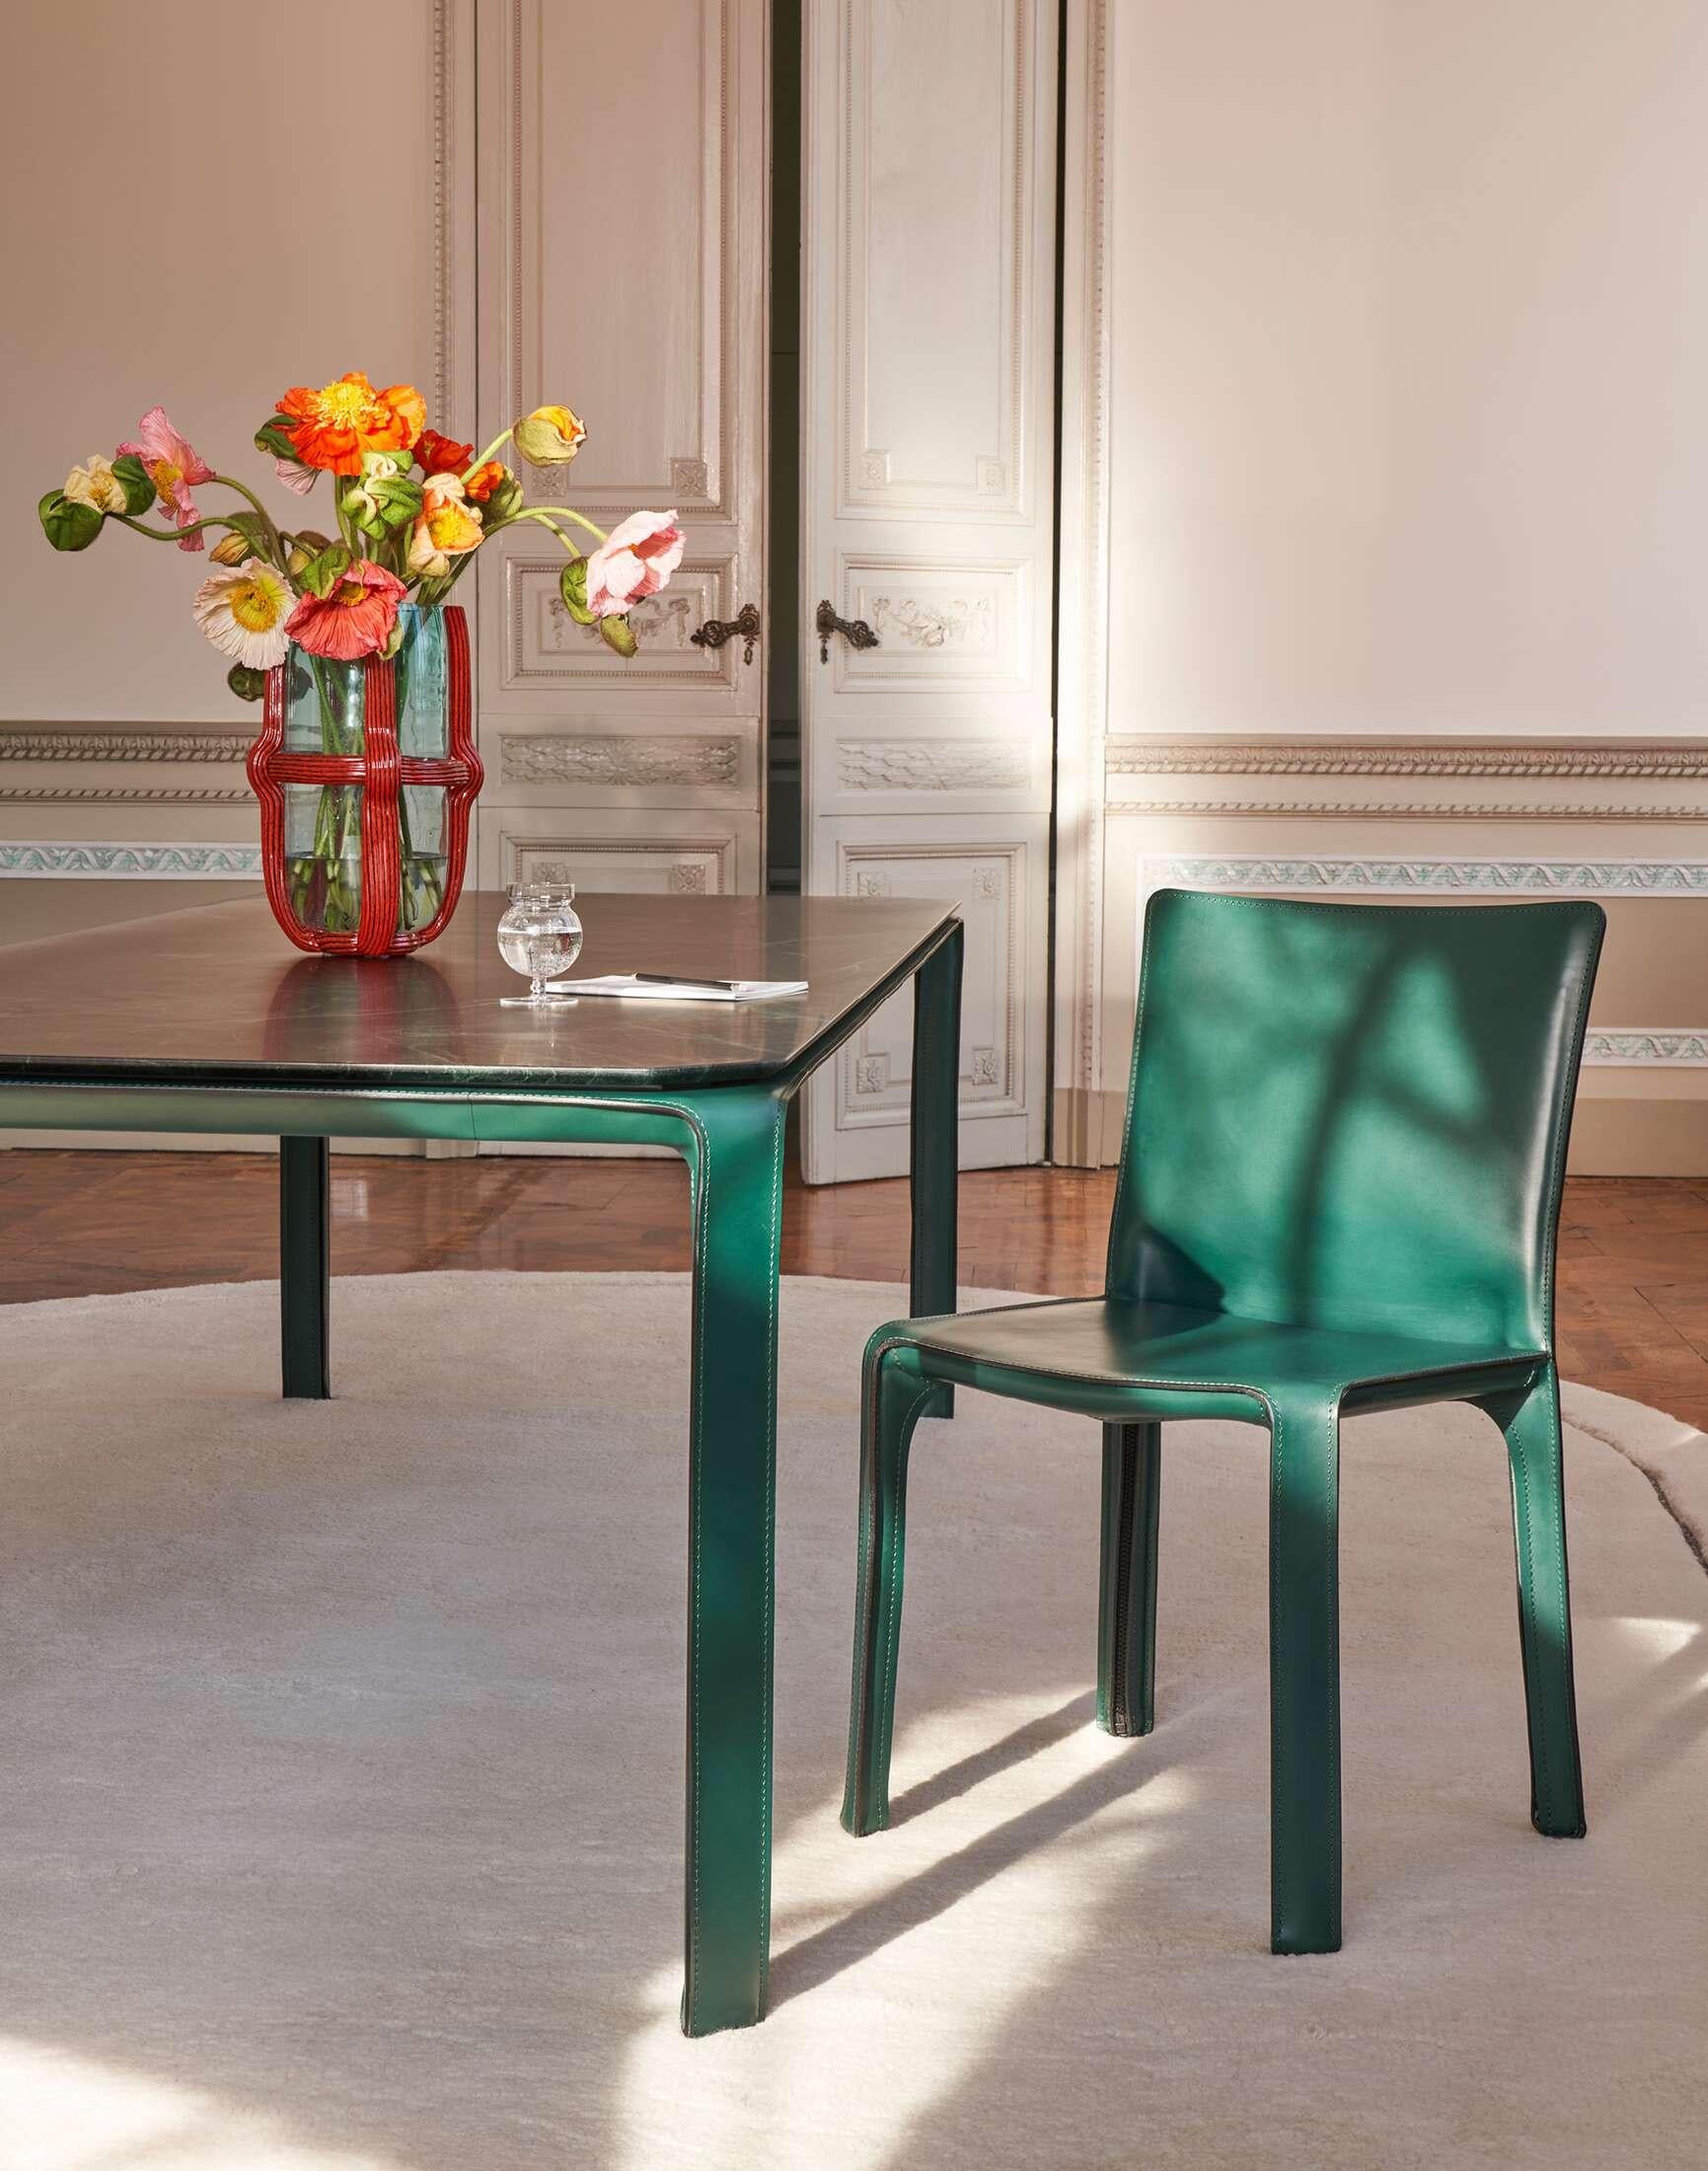 Also available in 200cm or 240cm width.Prices vary dependent on the chosen size, color and material. 

The design approach that in 1977 led Mario Bellini and Cassina to clad the structure of a chair in saddle leather – in the manner of a bespoke